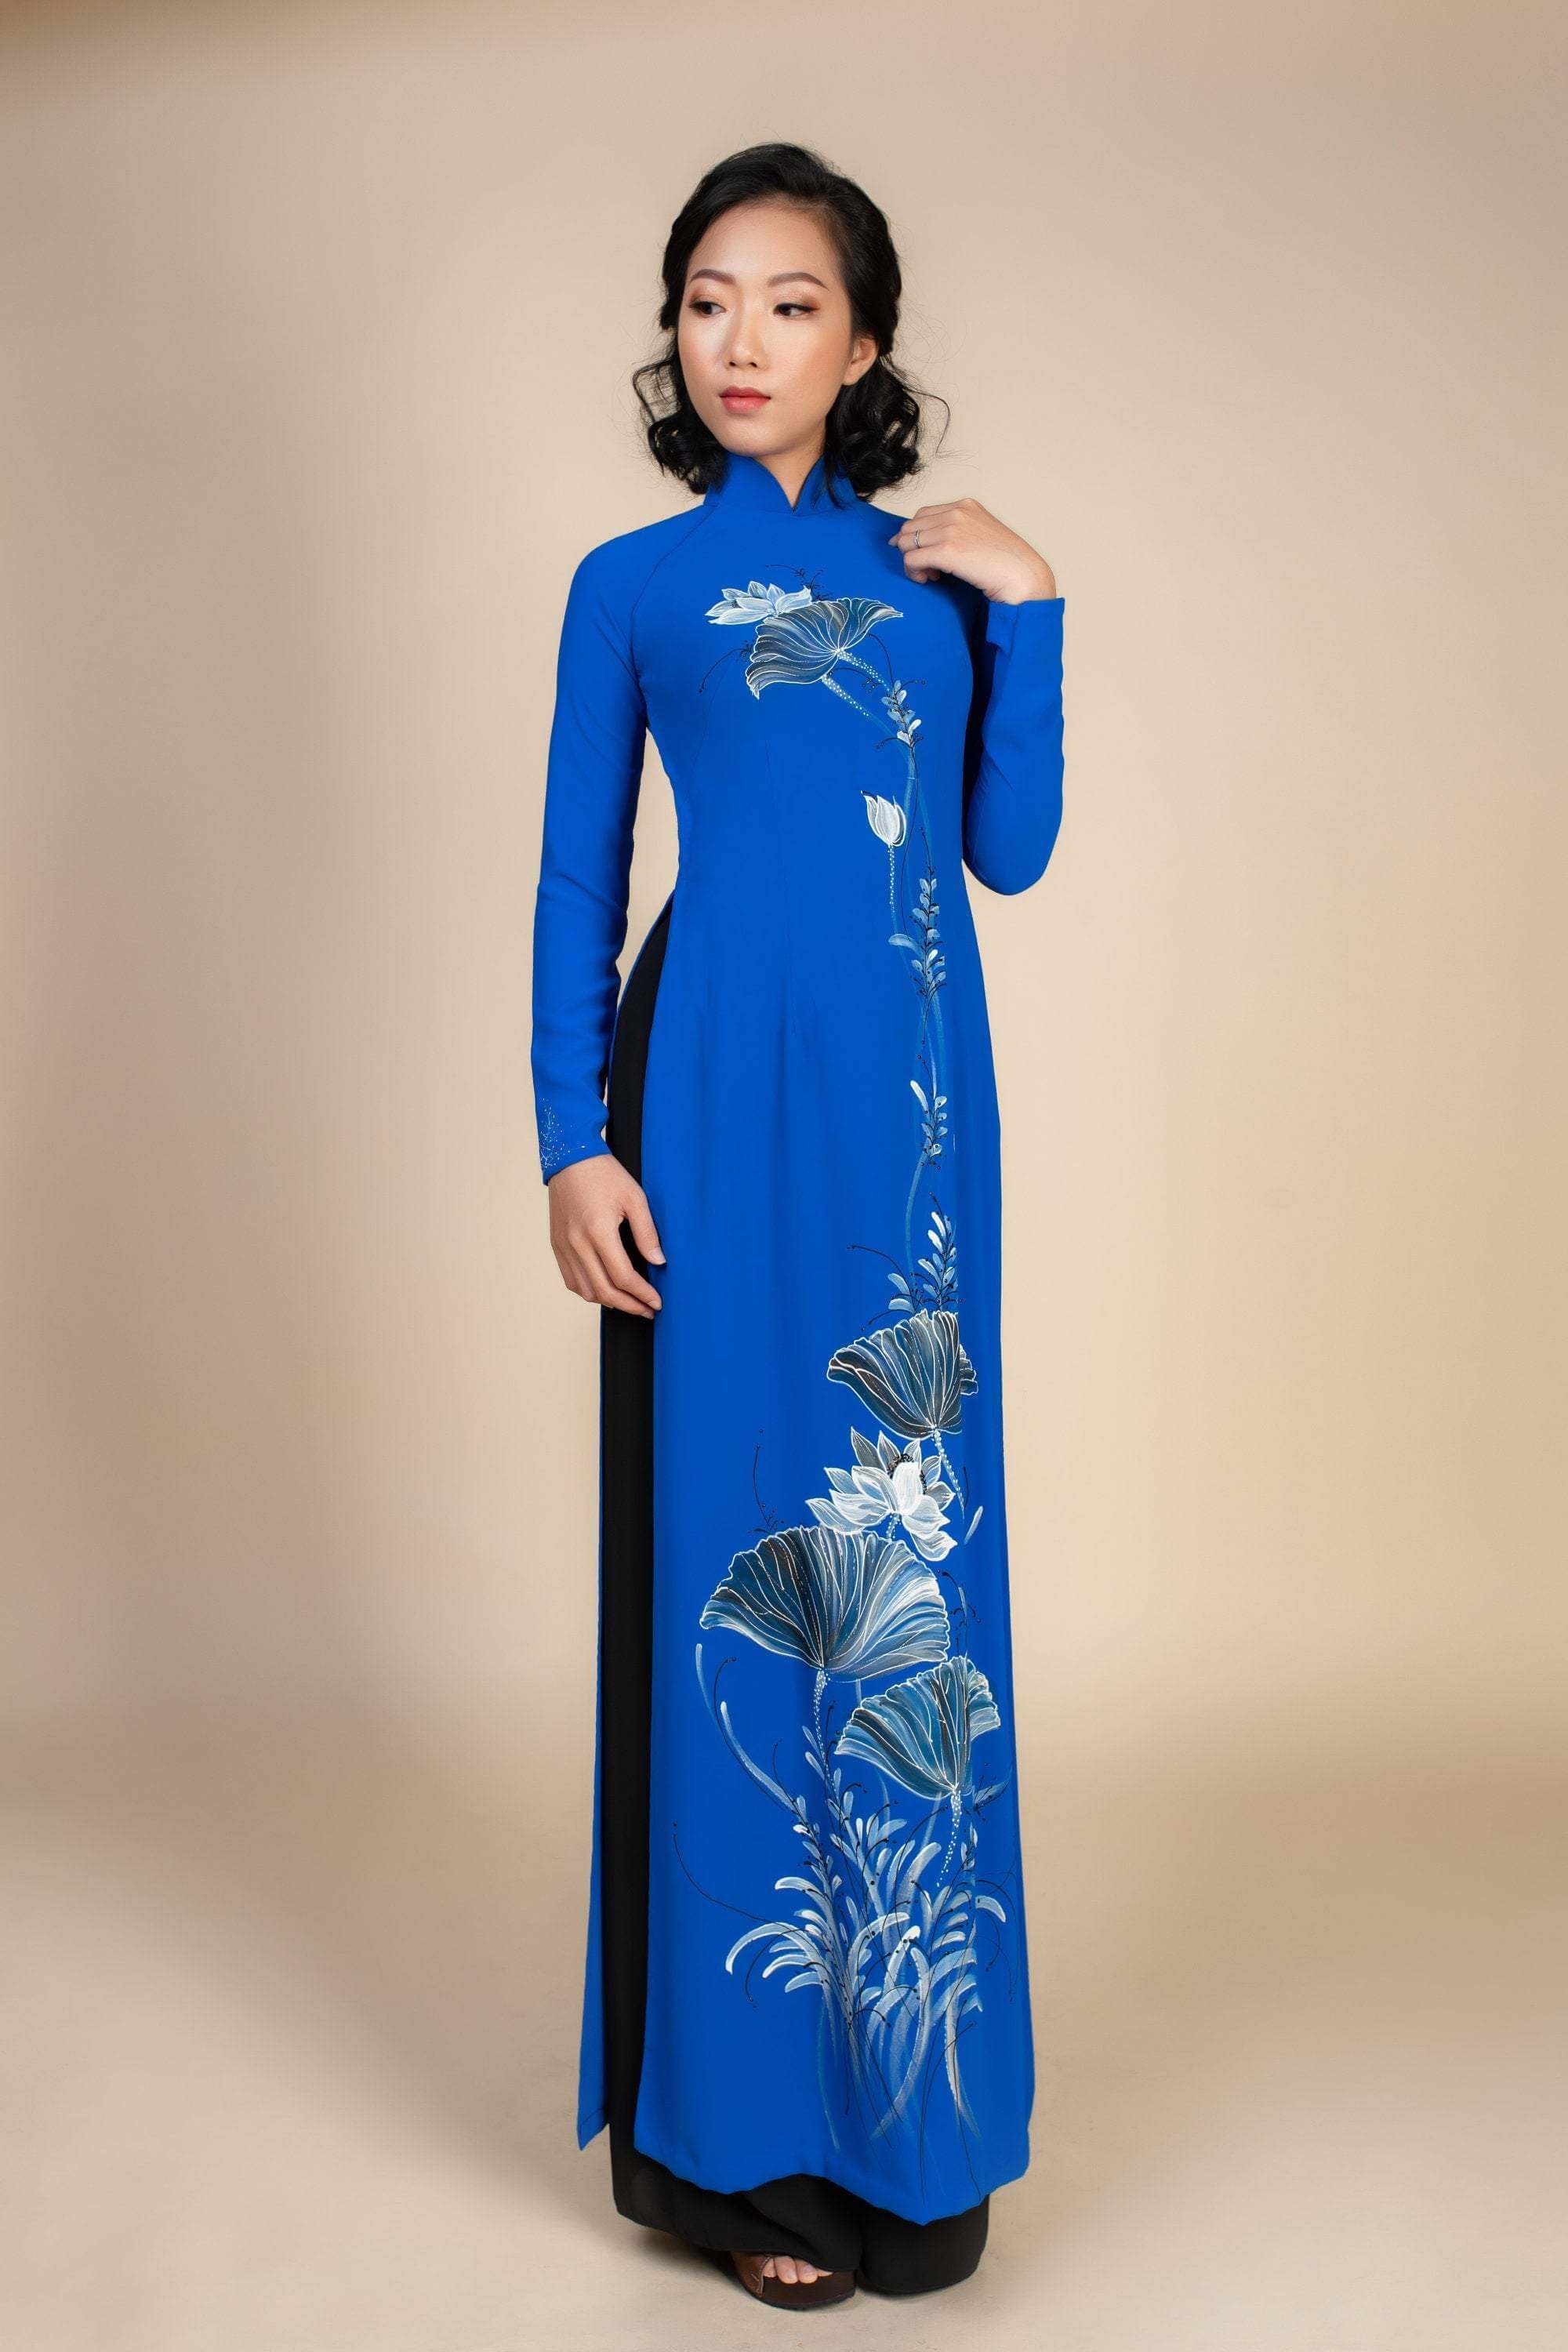 Ao Dai FAQ: Everything you need to know about buying a Vietnamese